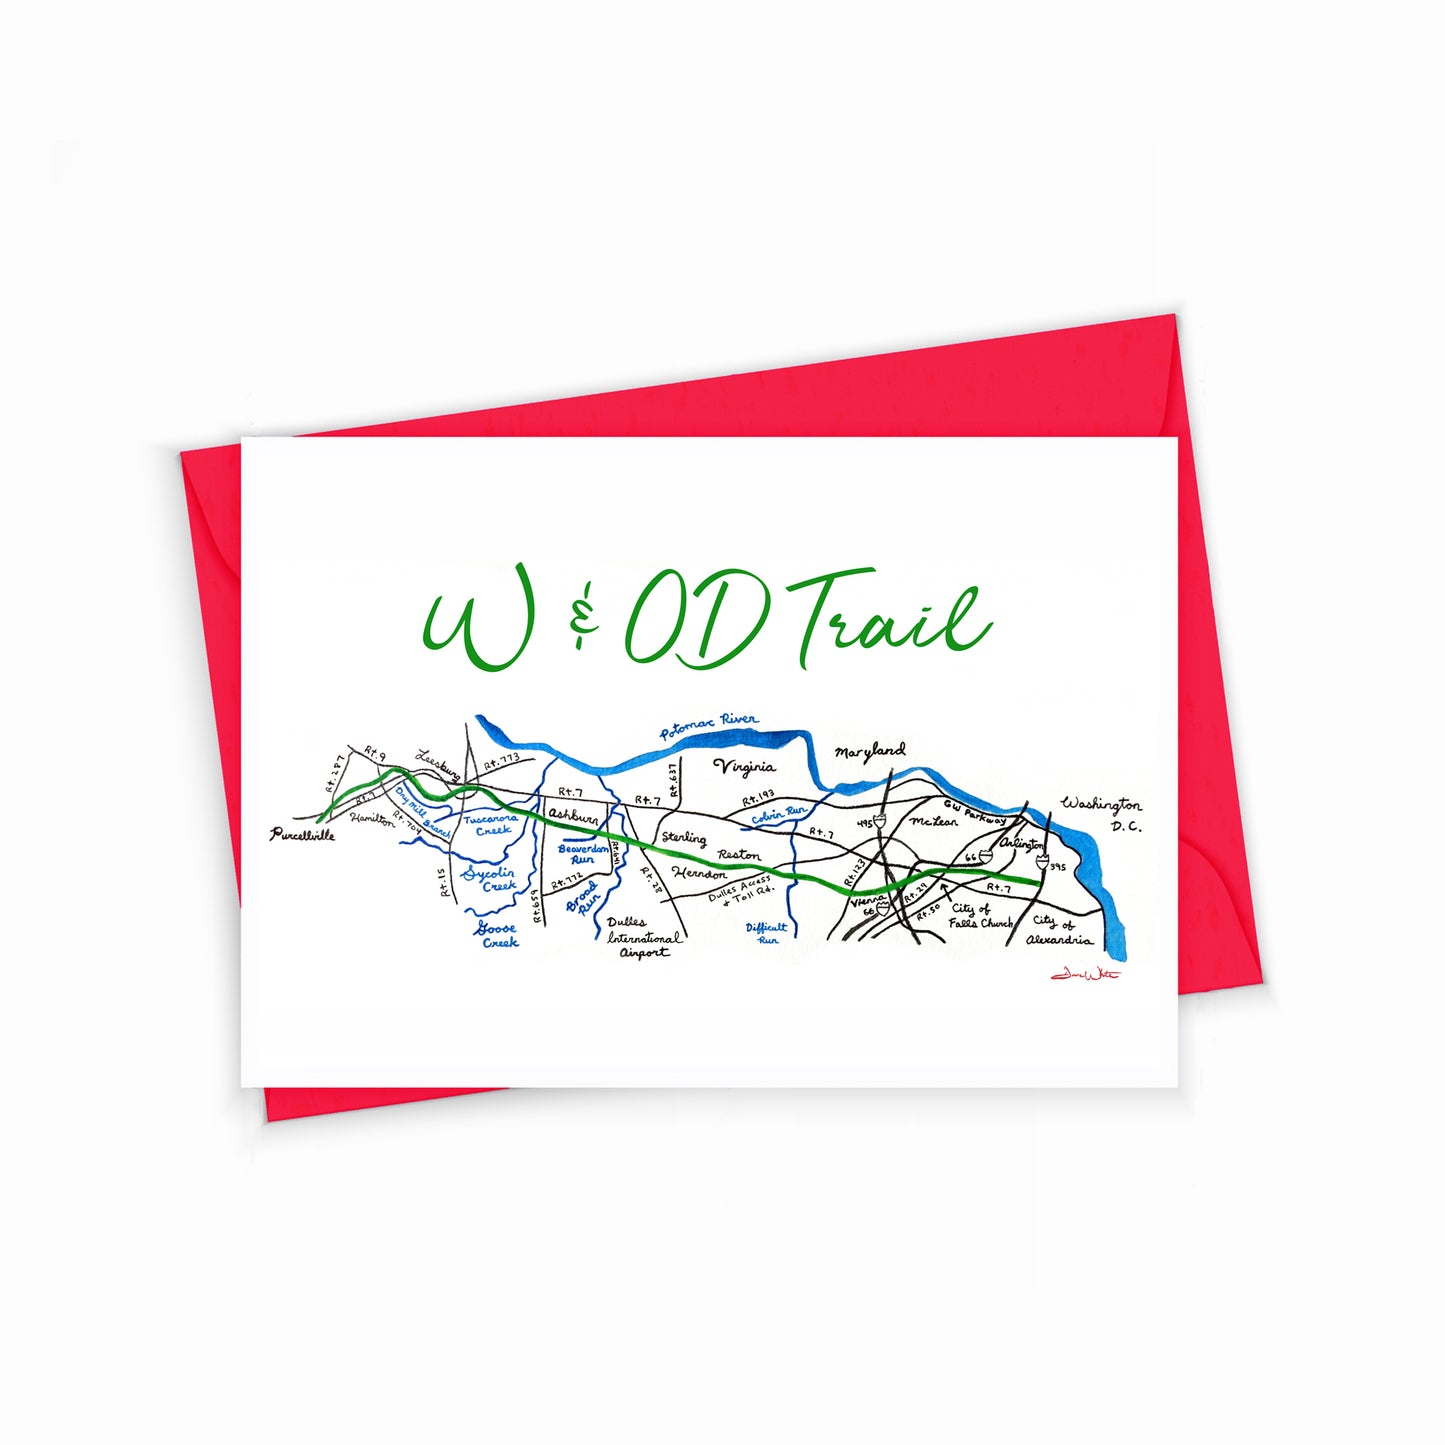 Greeting Card W&OD Trail Map by Artist Dave White